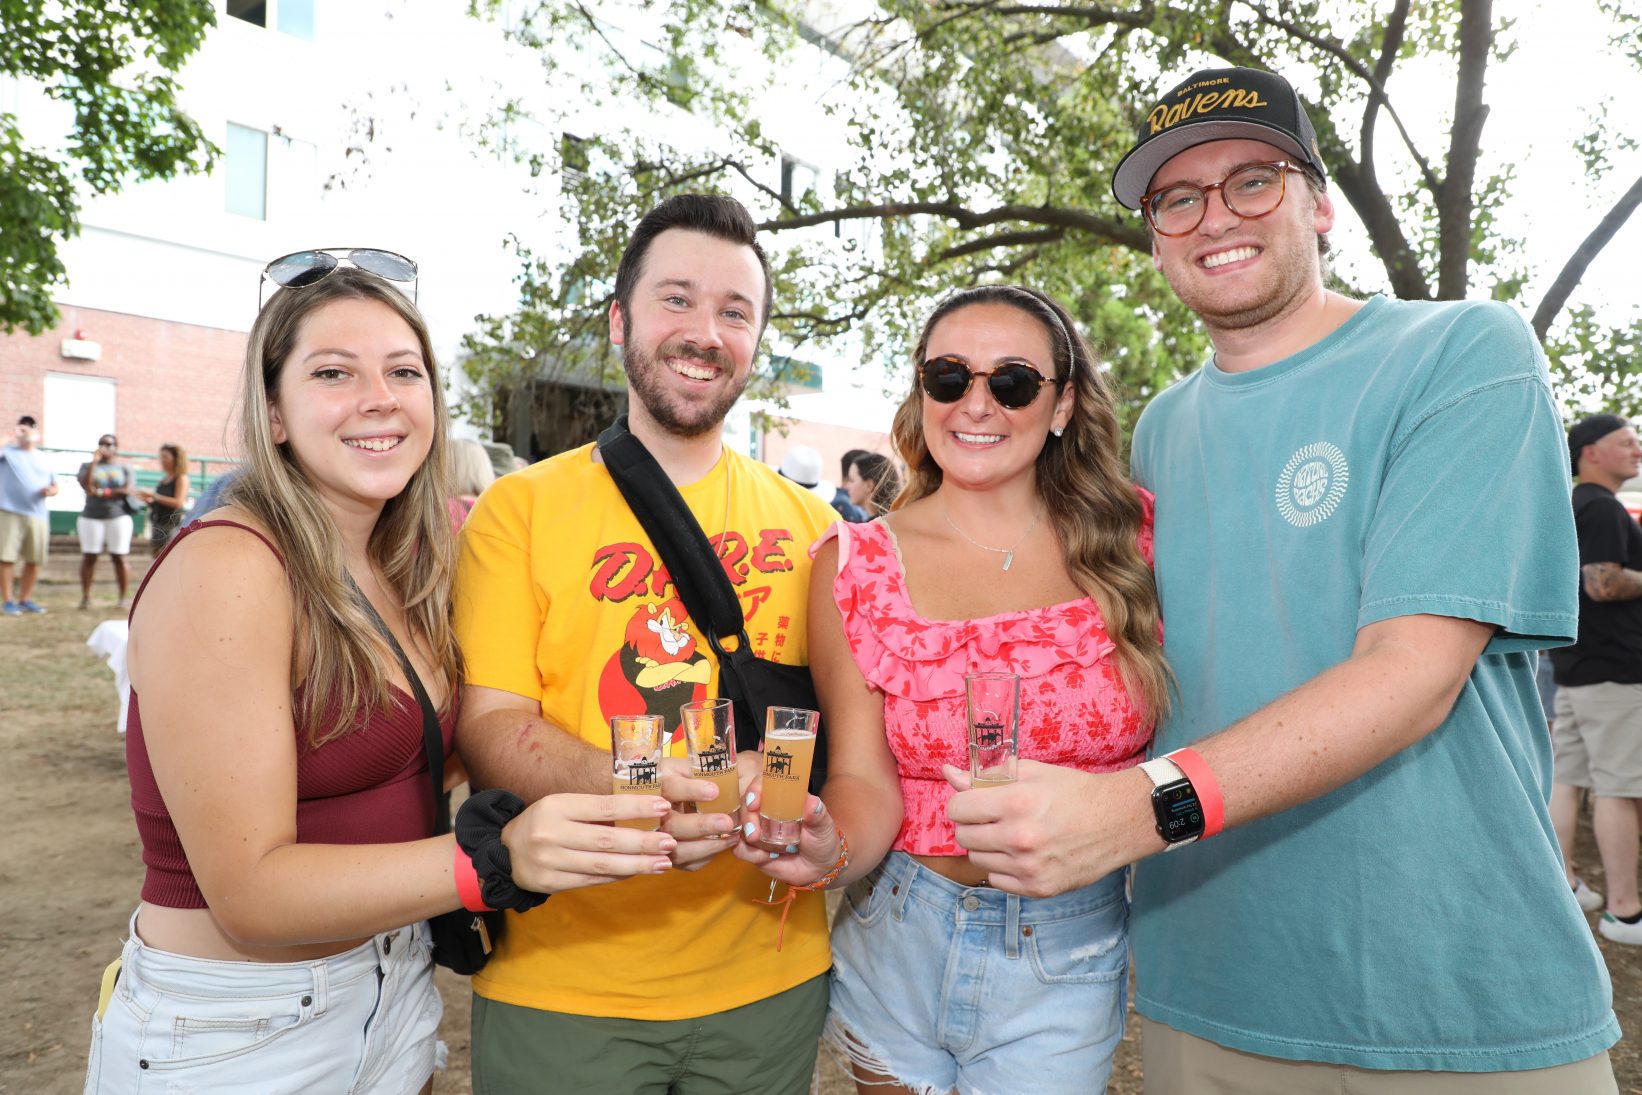 Three-Day BBQ & New Jersey Craft Beer Festival On Tap For Labor Day Weekend  at Monmouth Park Starting Saturday - Monmouth Park